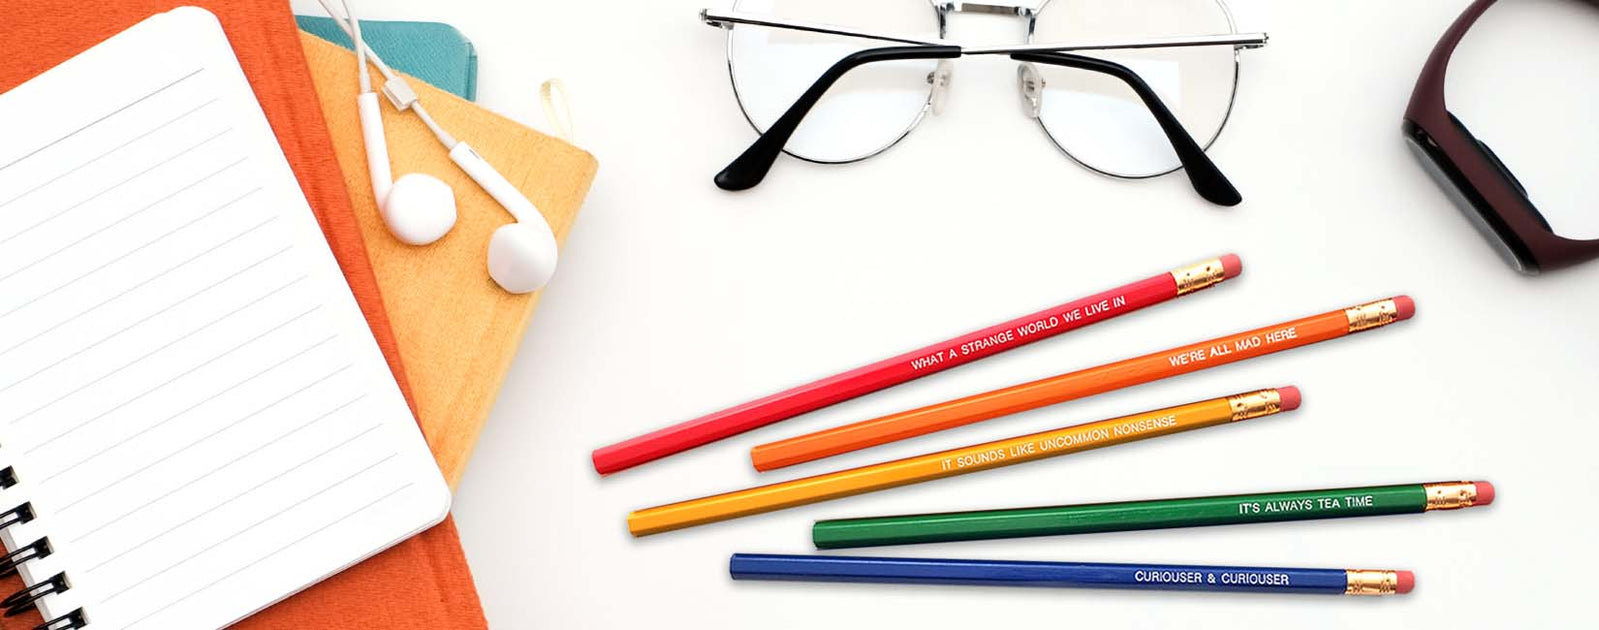 Fresh Prints of CT Friencils - Inspirational Pencils Engraved With Funny  And Motivational Sayings For School And The Office